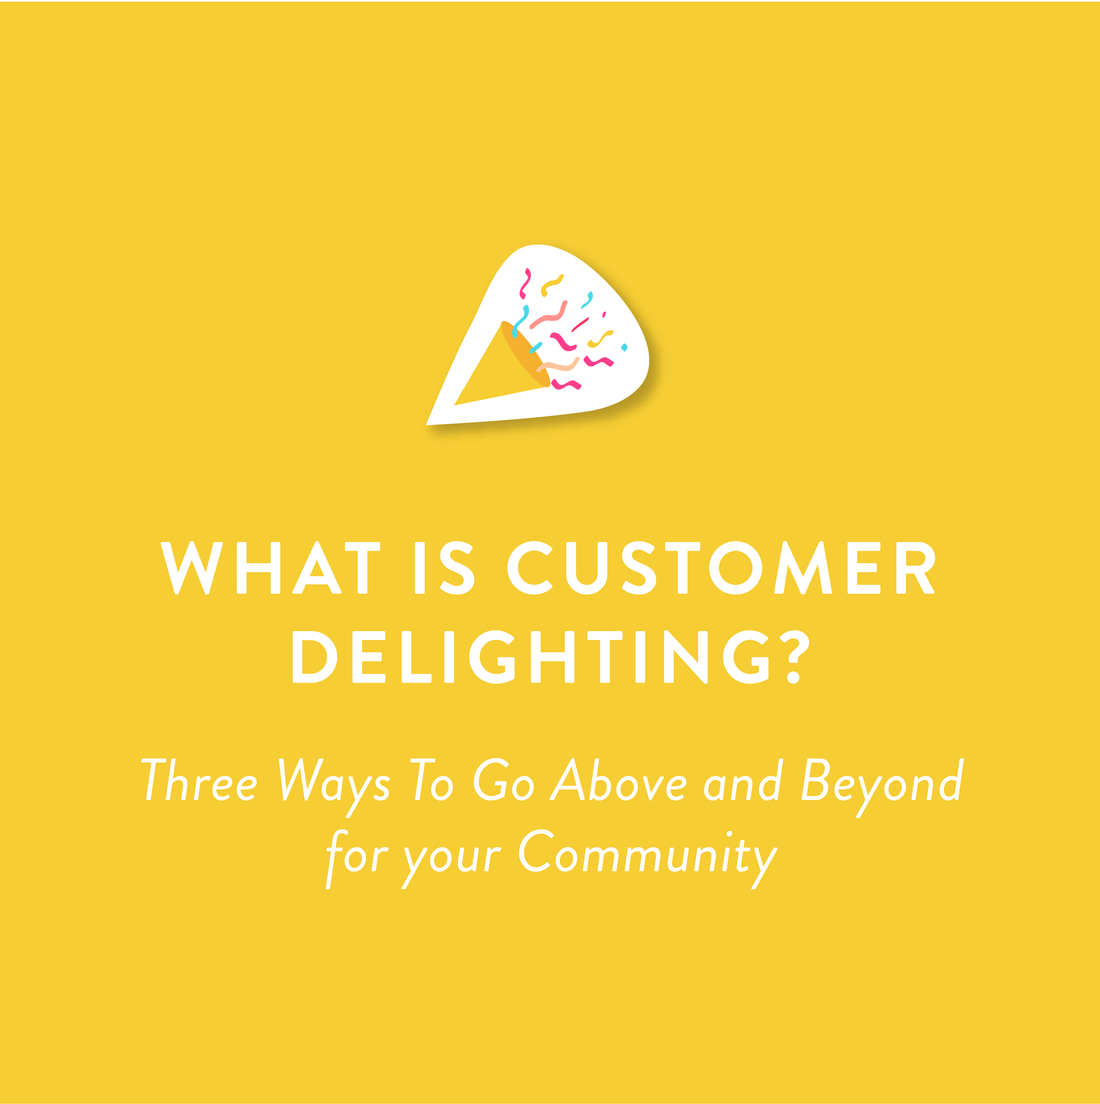 What is Customer Delighting? Three Ways To Go Above and Beyond for your Community